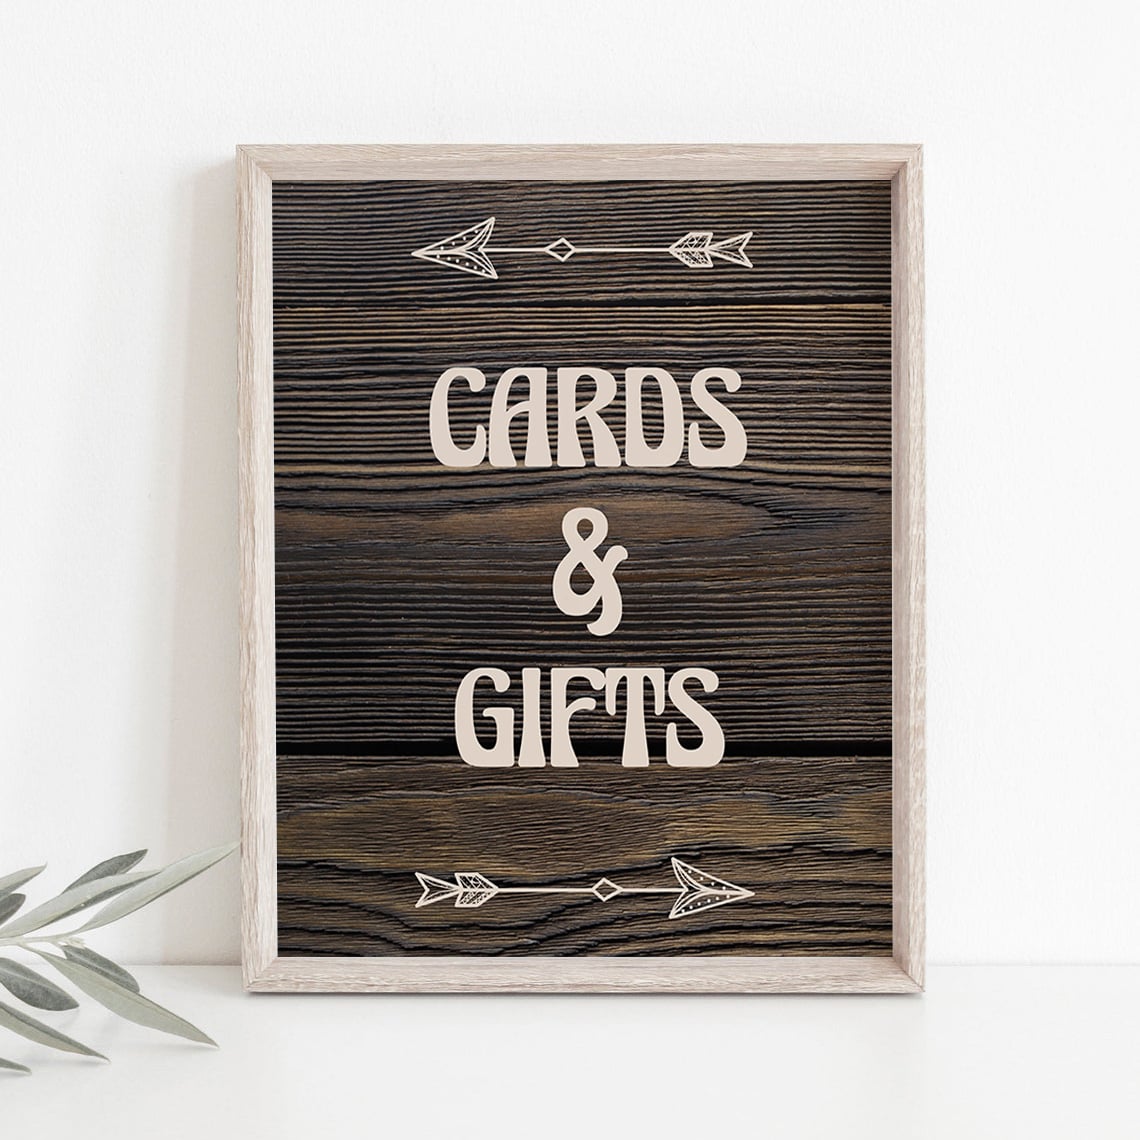 Rustic gifts sign download for forest party by LittleSizzle